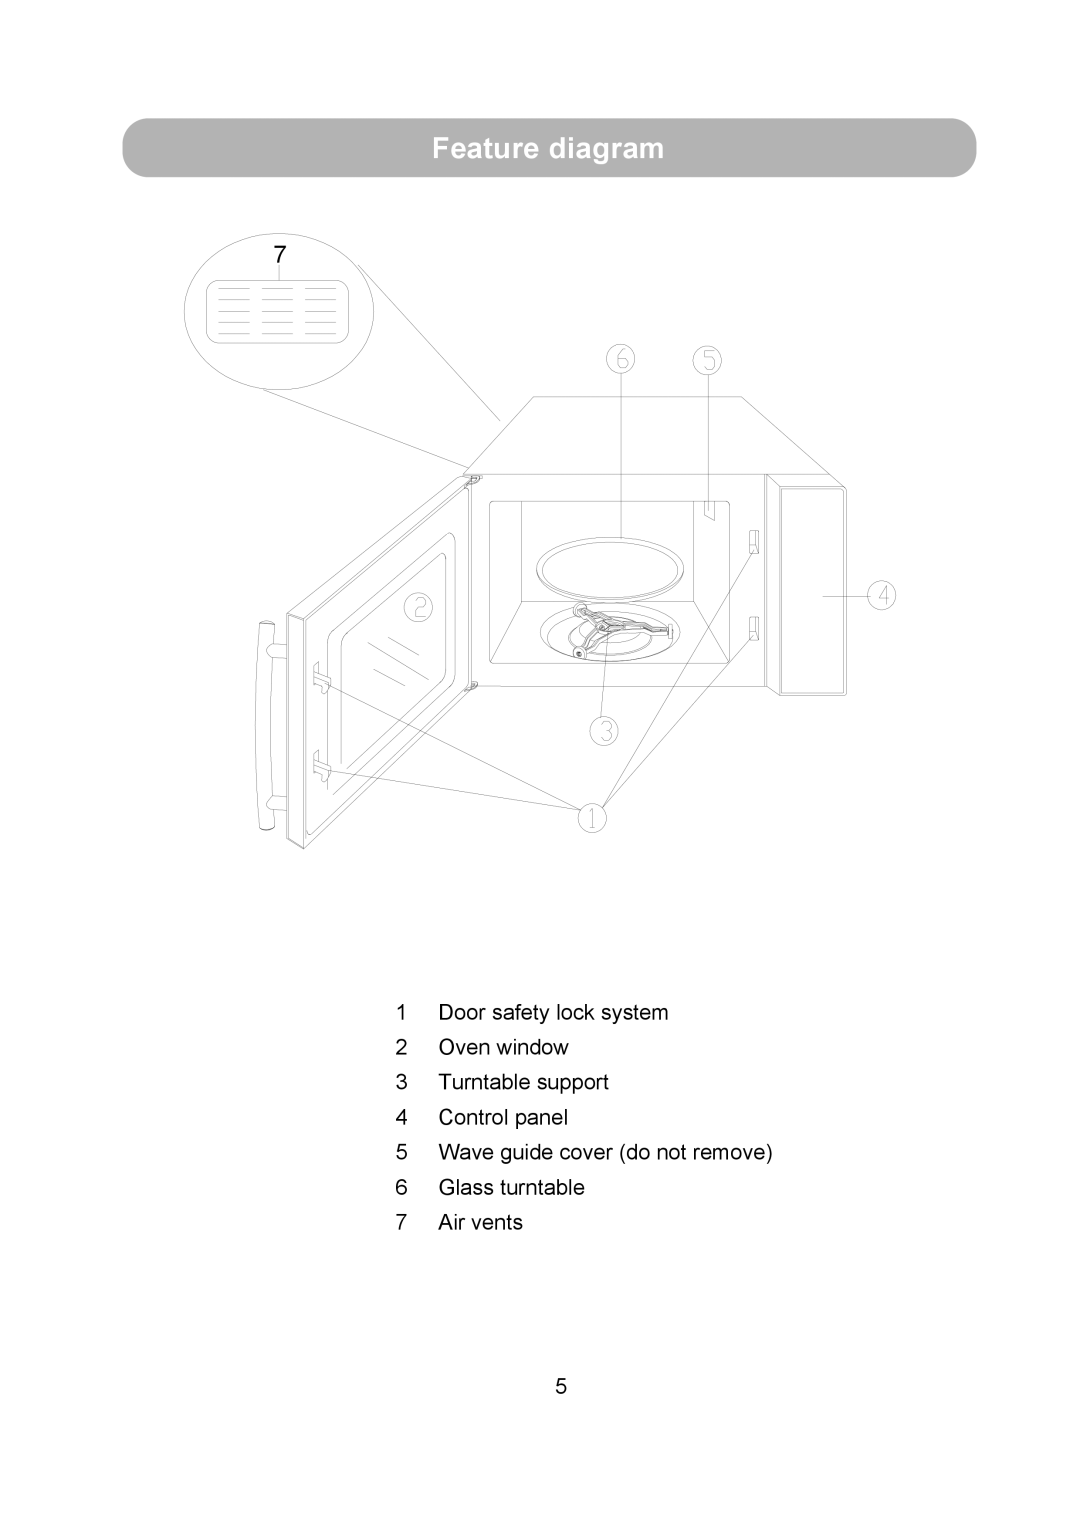 Russell Hobbs RHM1710 user manual Feature diagram, Door safety lock system 2 Oven window 3 Turntable support, Air vents 